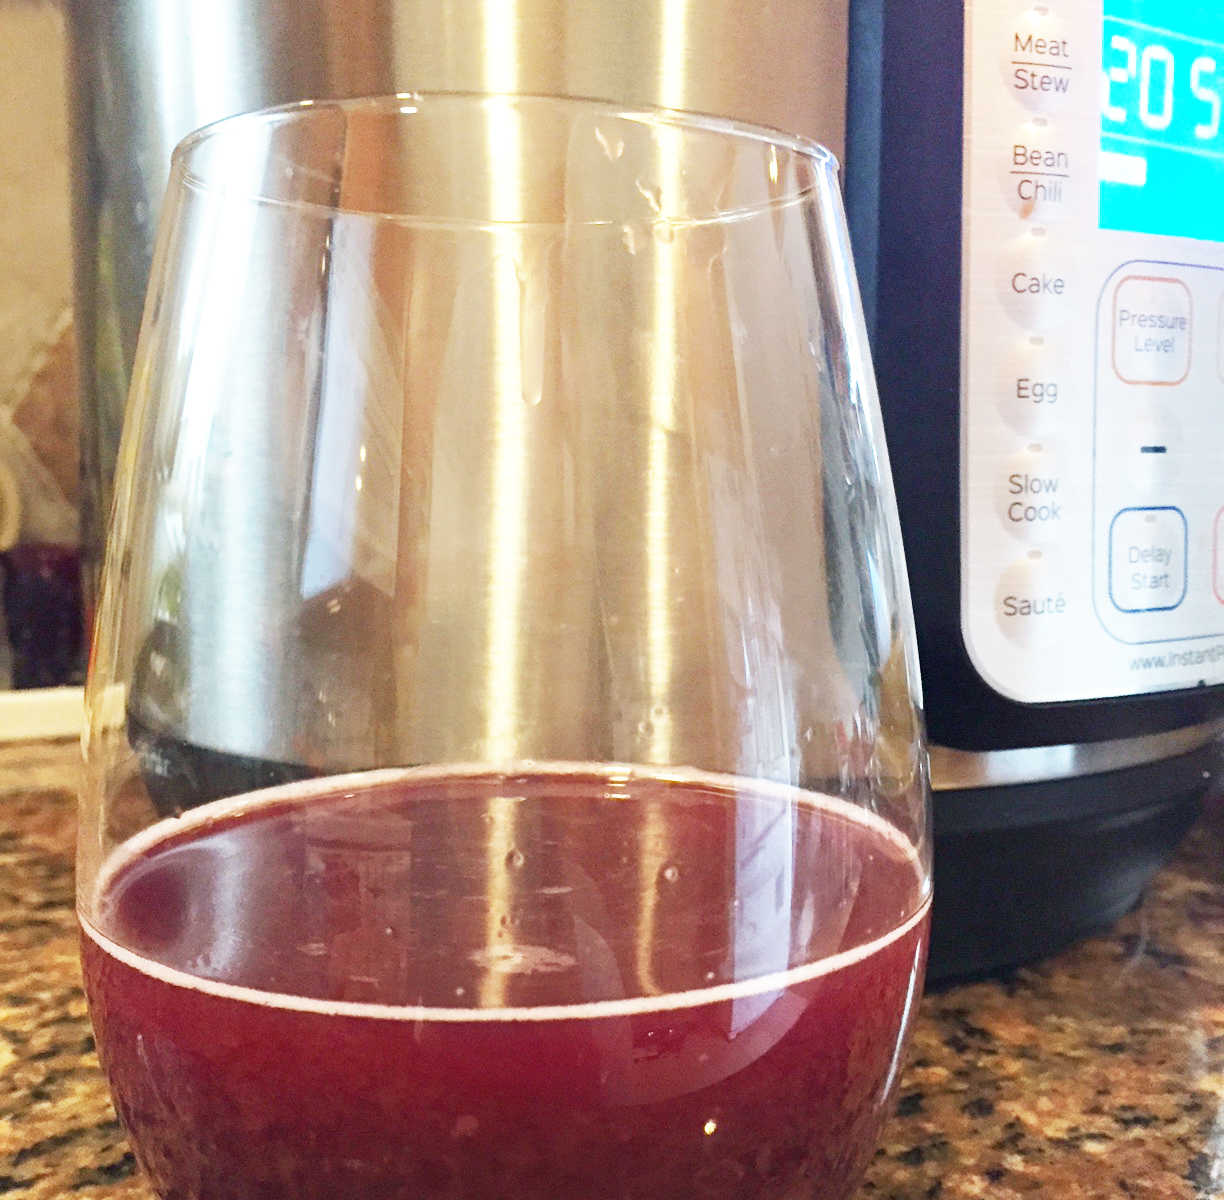 Stemless wine glass filled with red wine sitting on counter in front of instant pot